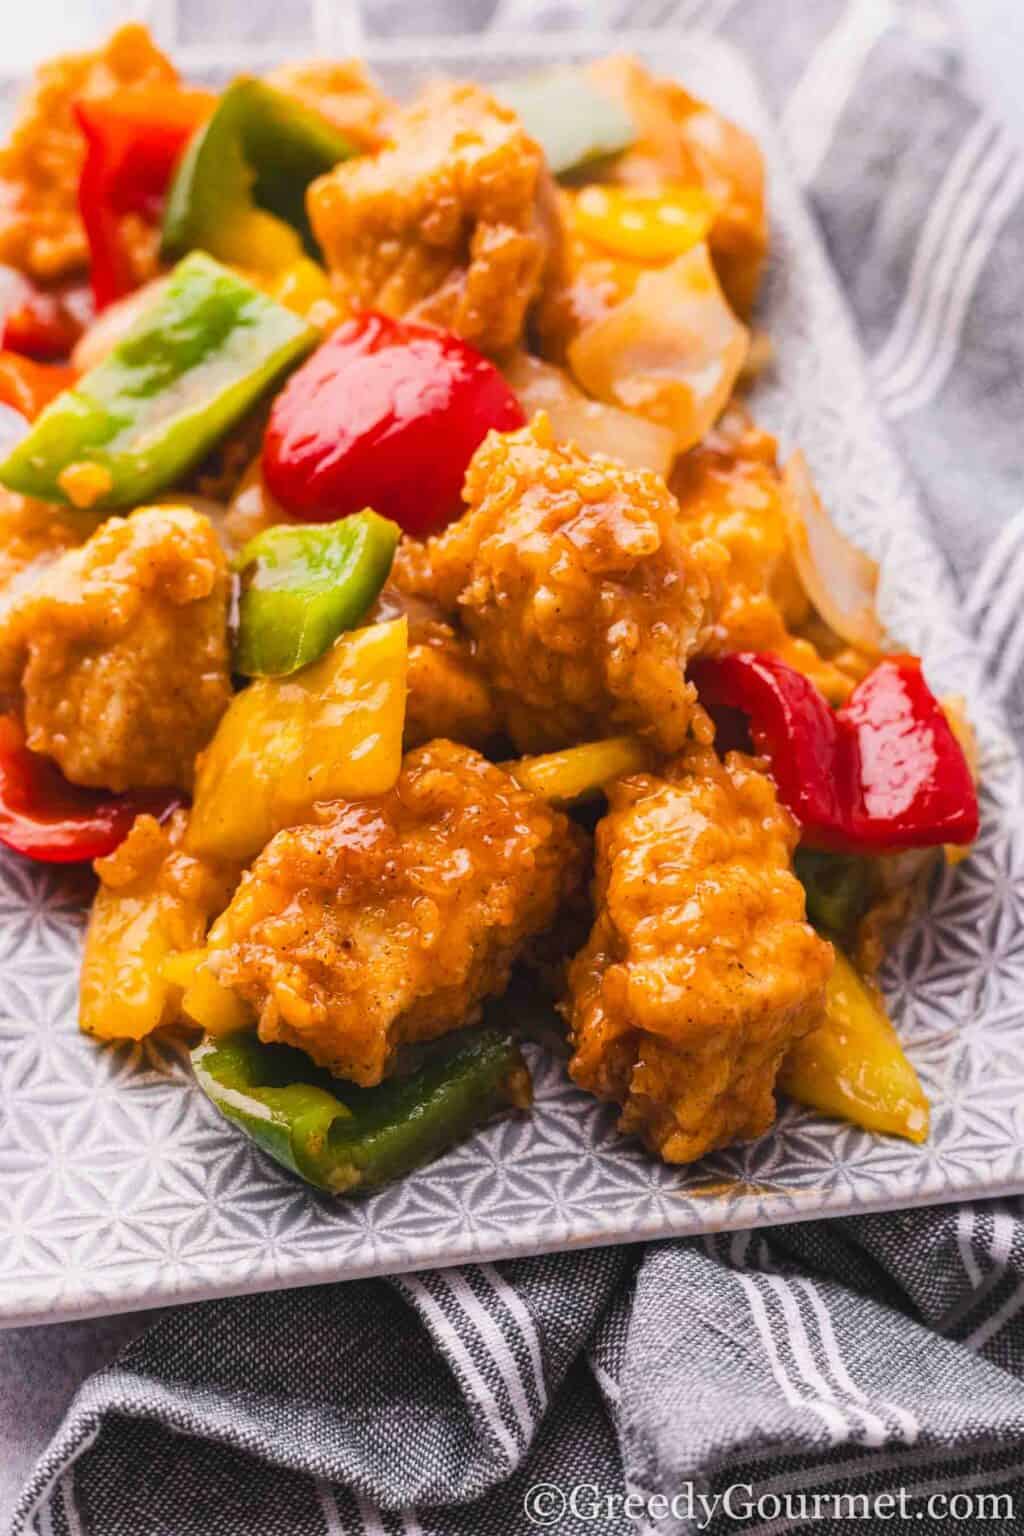 Sweet And Sour Chicken | Greedy Gourmet